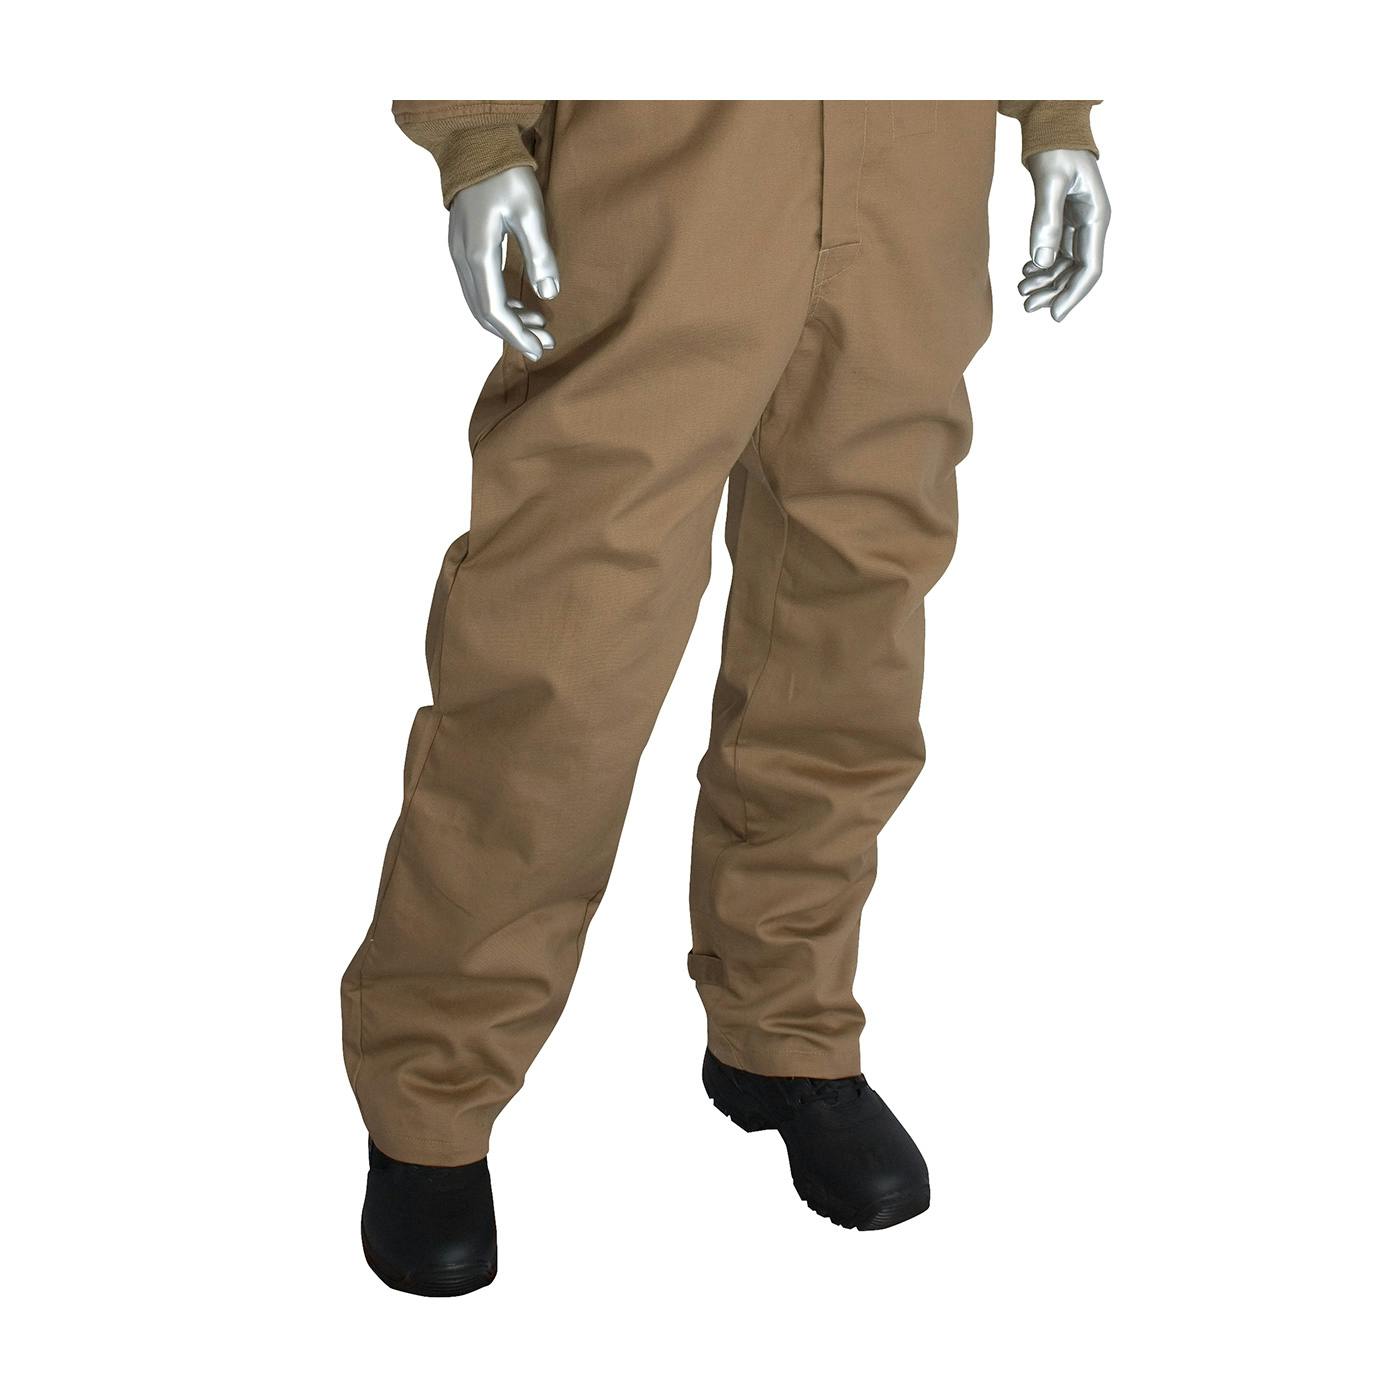 AR/FR Dual Certified Coverall with Vented Back - 8 Cal/cm2, Tan (9100-2100D)